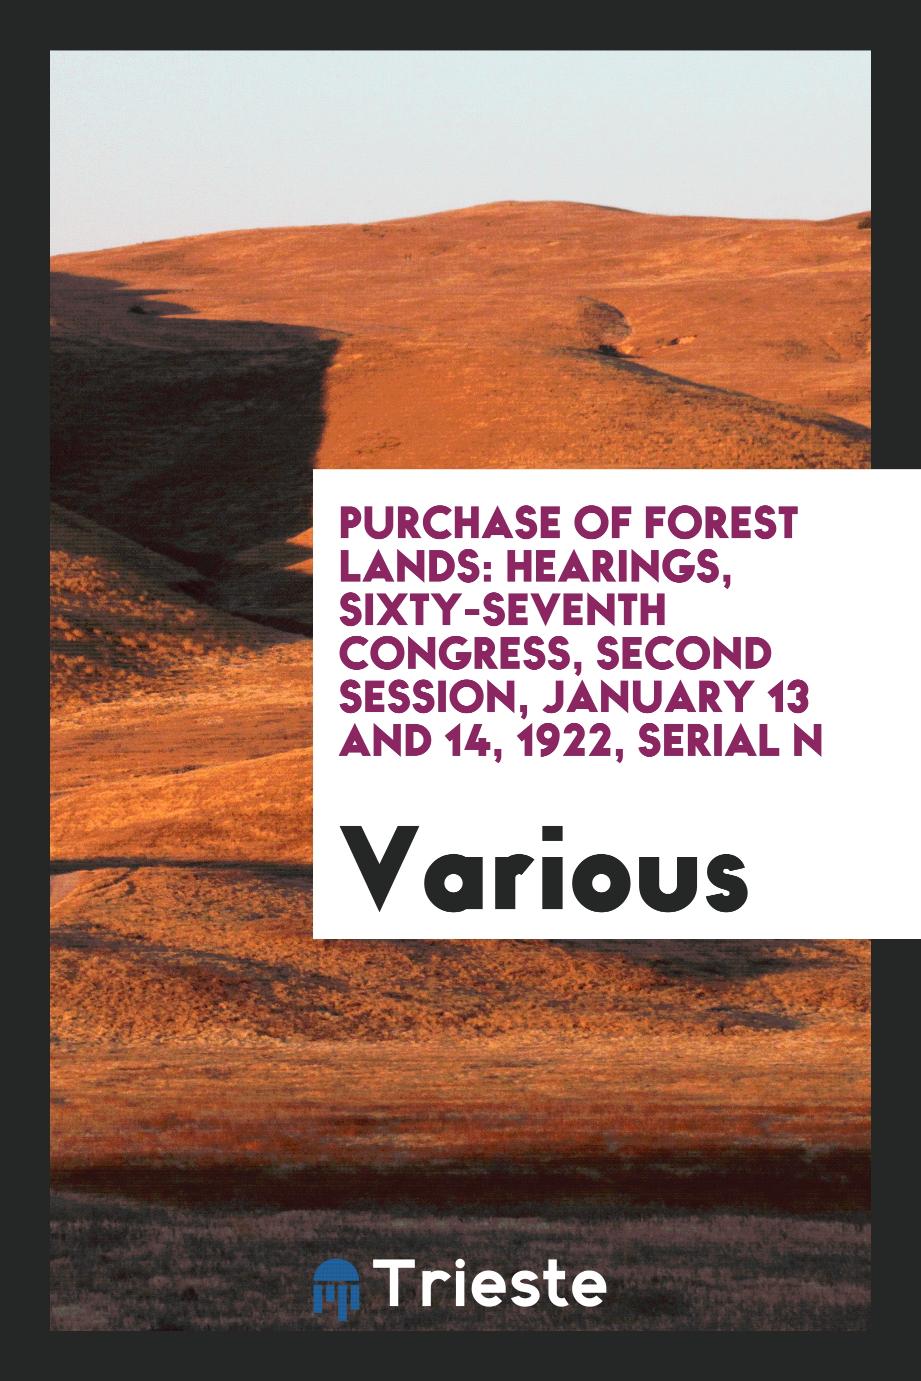 Purchase of Forest Lands: Hearings, Sixty-seventh congress, second session, January 13 and 14, 1922, Serial N